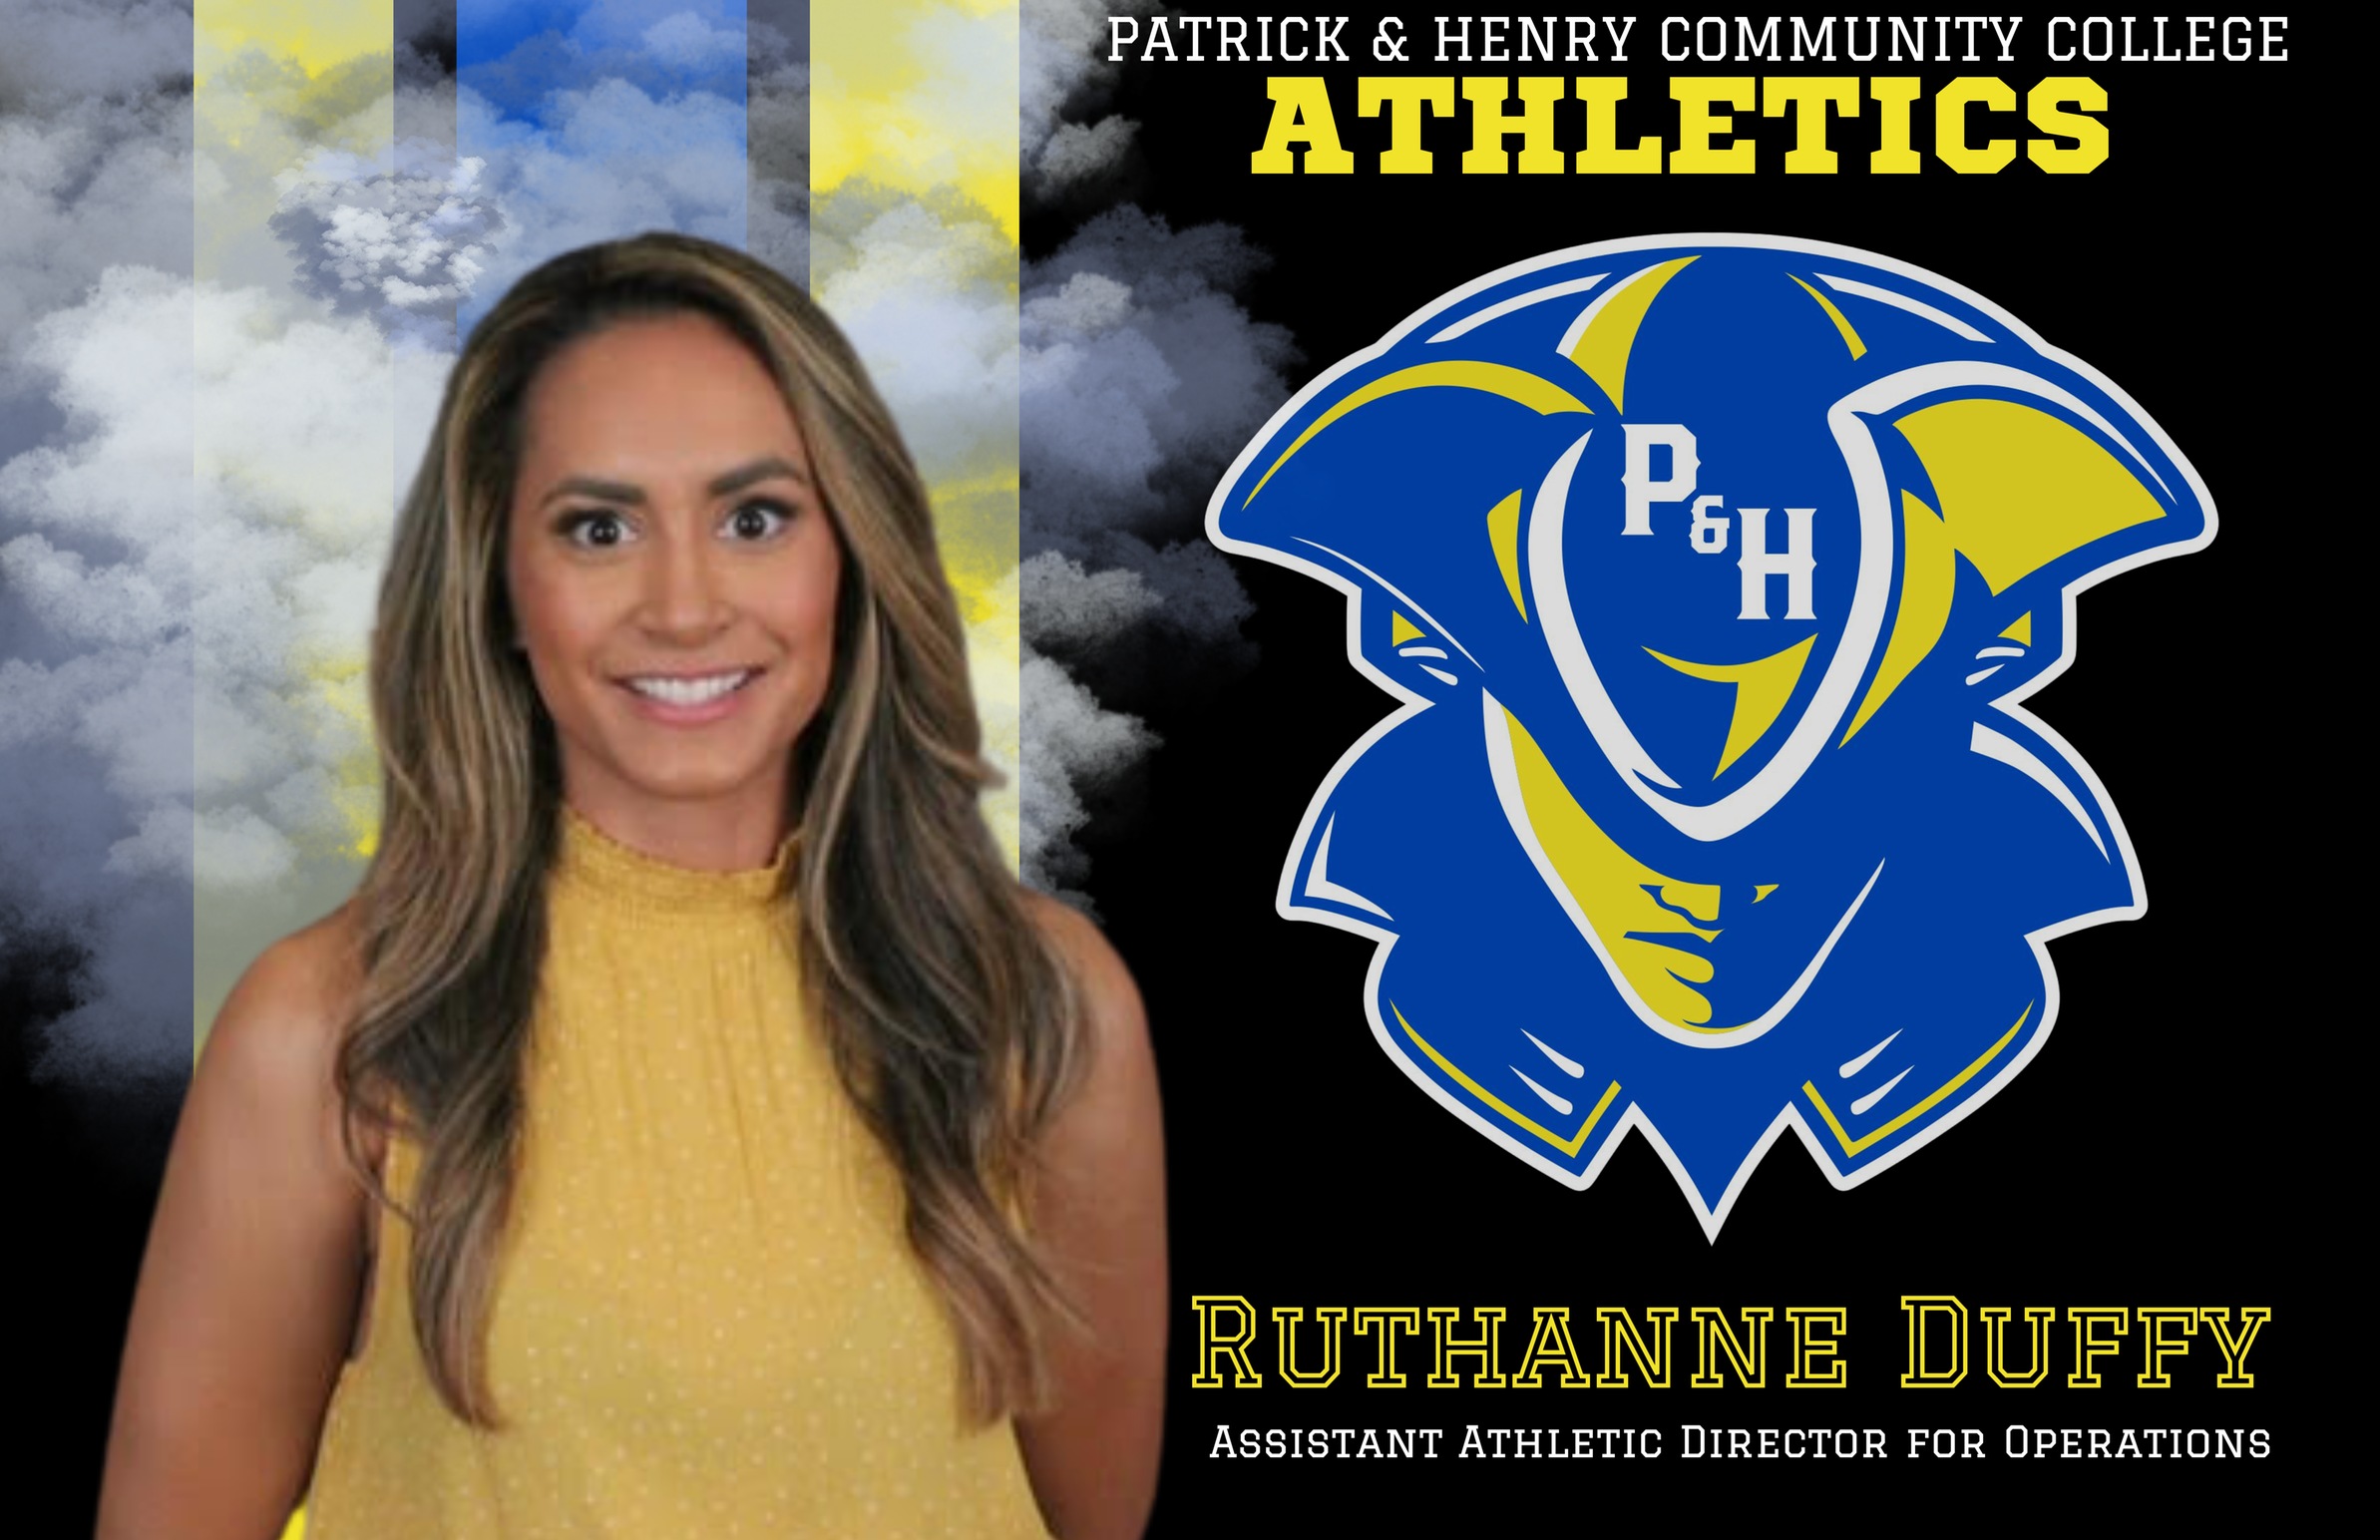 P&HCC Athletics Hires Ruthanne Duffy as Assistant Athletic Director of Operations